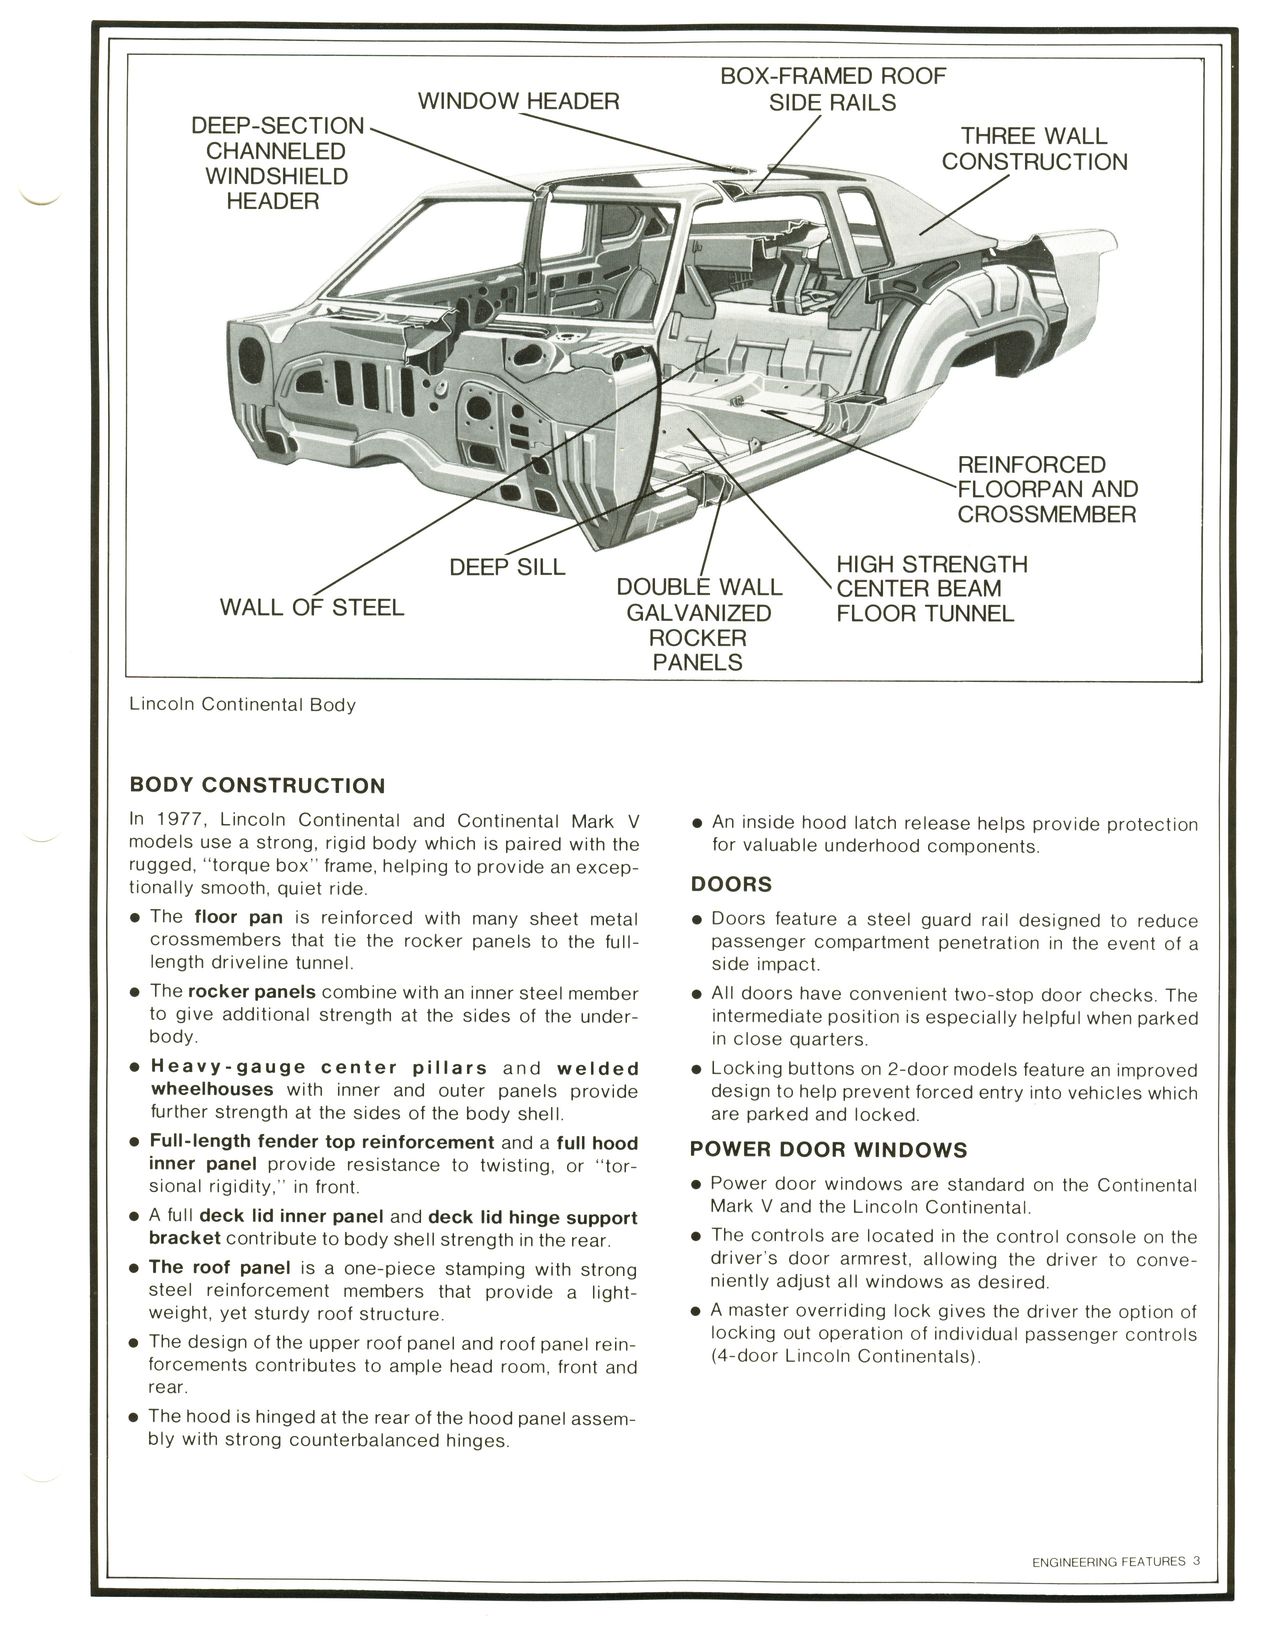 1977 Lincoln Continental Mark V Product Facts Book Page 41